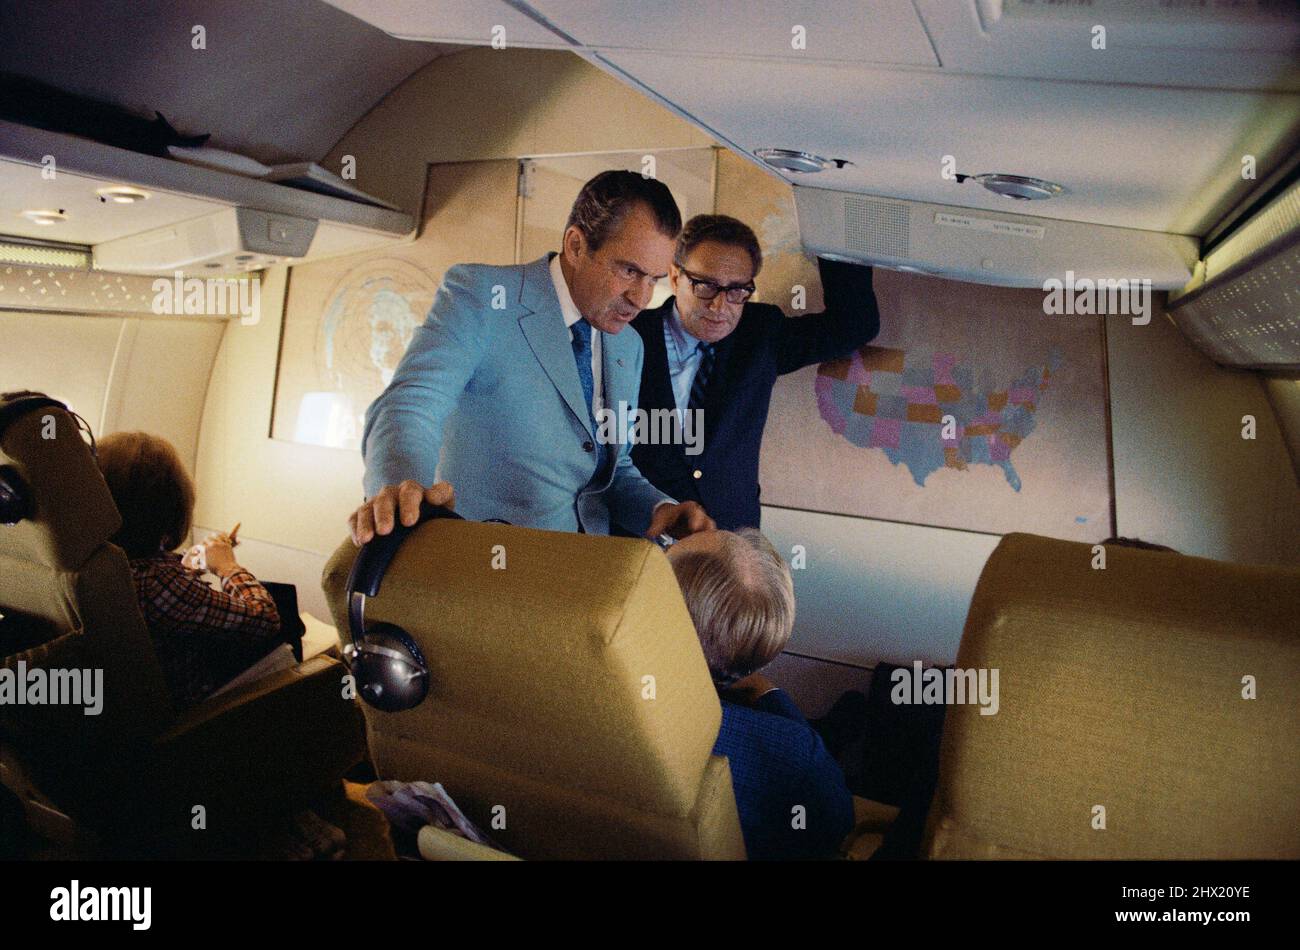 ONBOARD AIR FORCE ONE - 20 February 1972 - US President Richard Nixon confers with staffers Henry Kissinger and William P Rogers, on board Air Force O Stock Photo